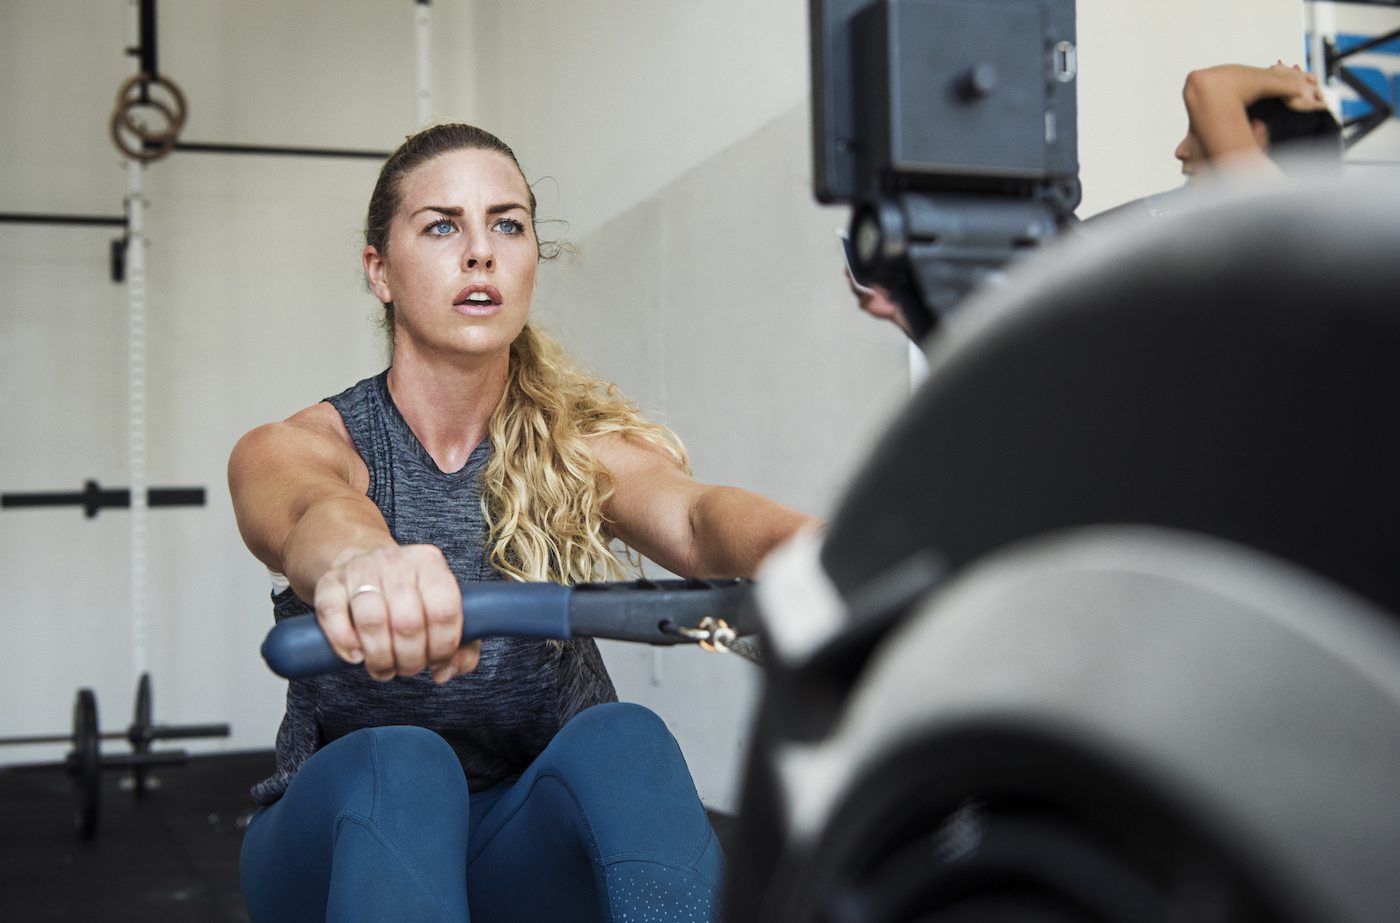 A women exercises on a rowing machine.